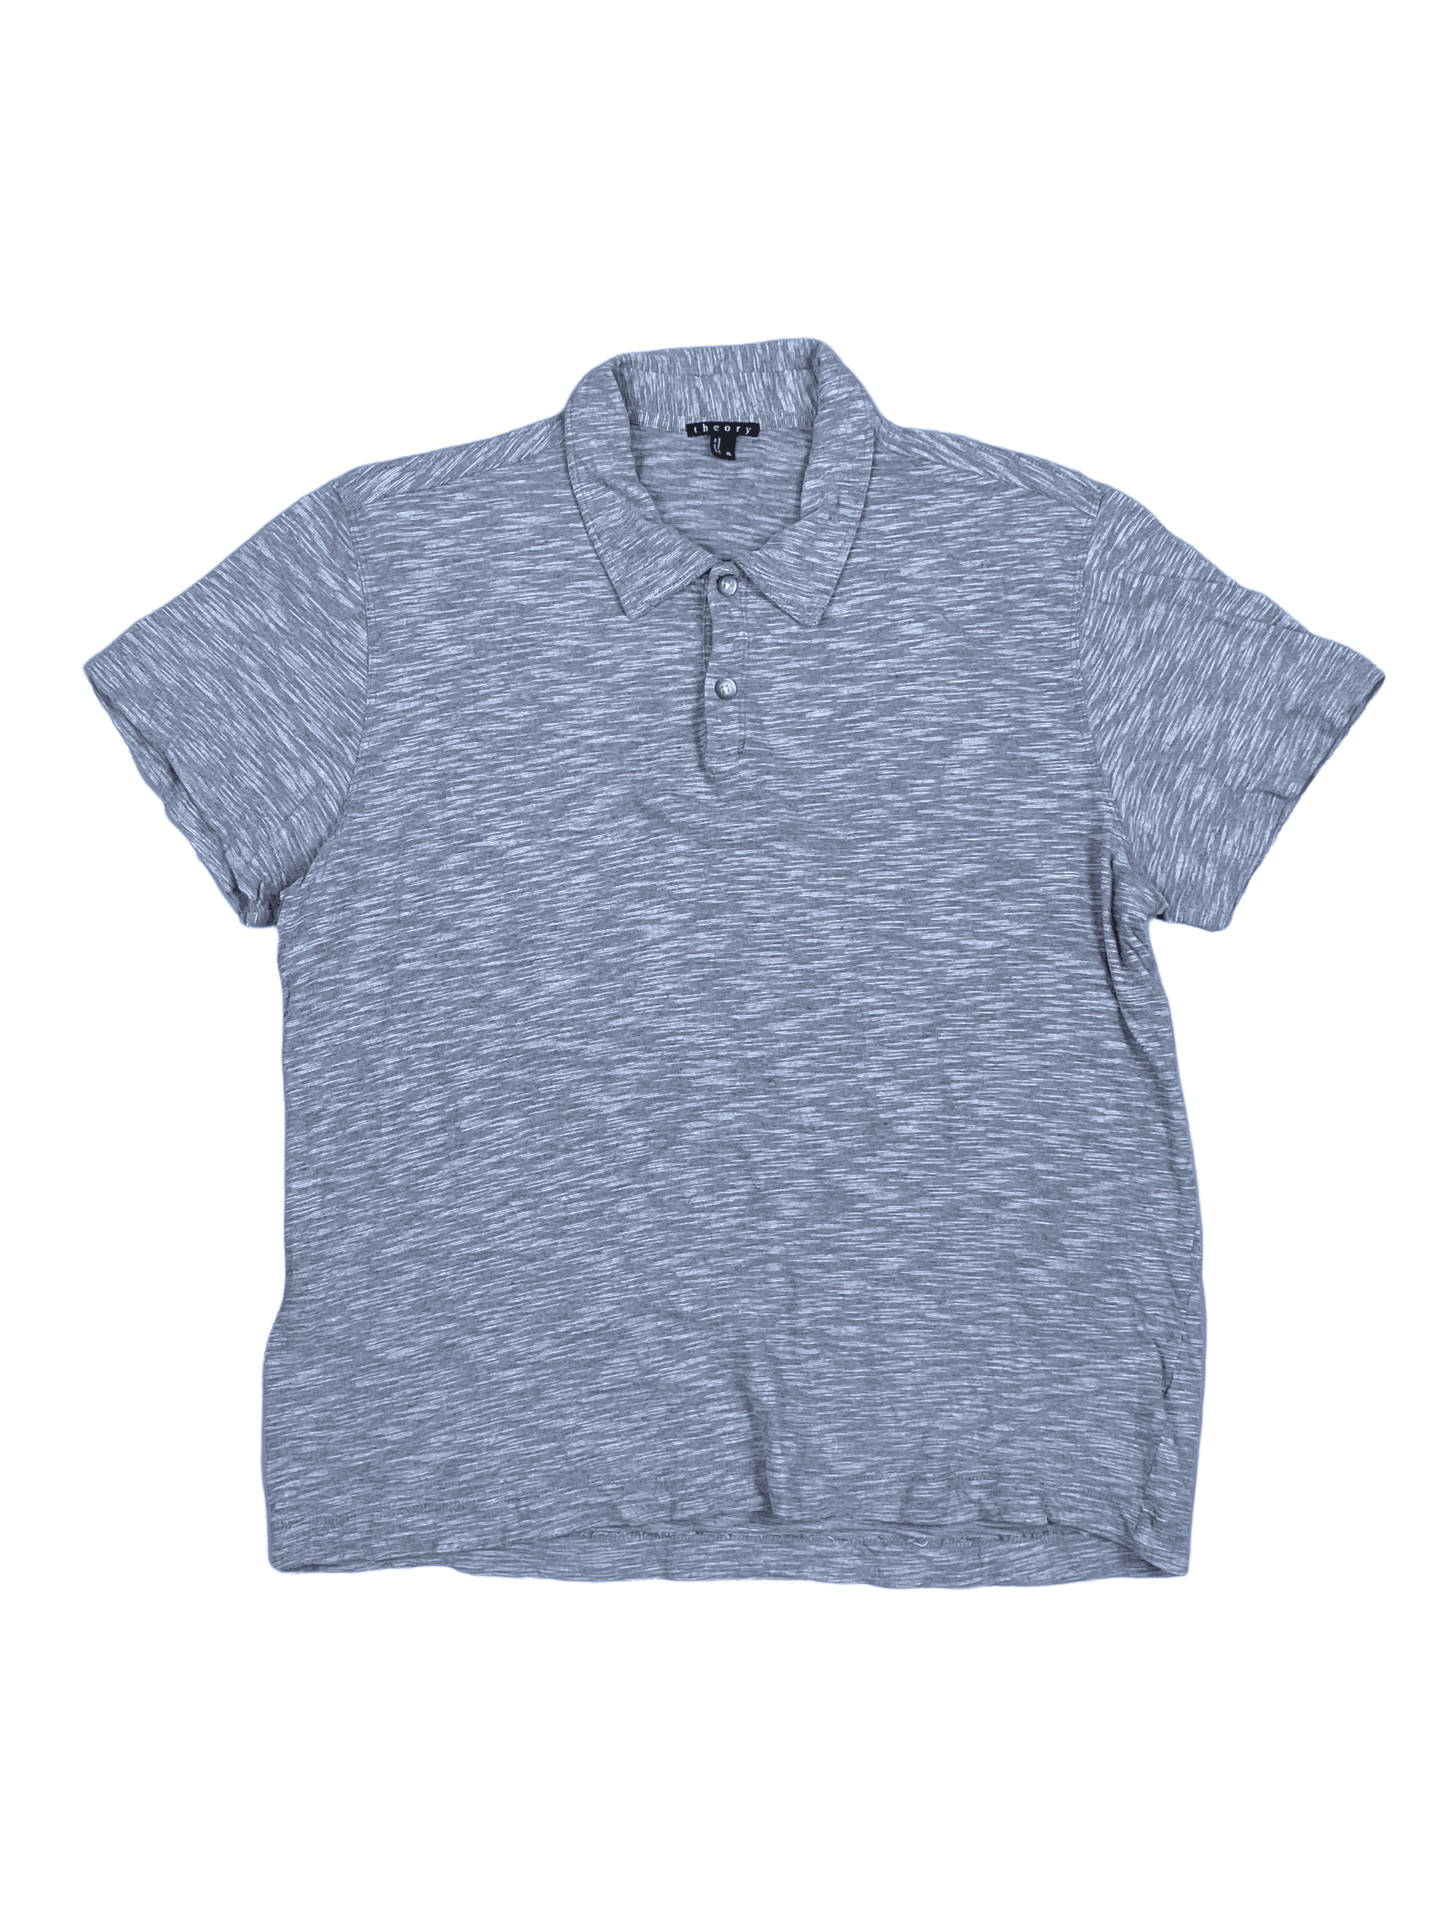 Theory Marled Blue Cotton Polo XL - Genuine Design Luxury Consignment for Men. New & Pre-Owned Clothing, Shoes, & Accessories. Calgary, Canada